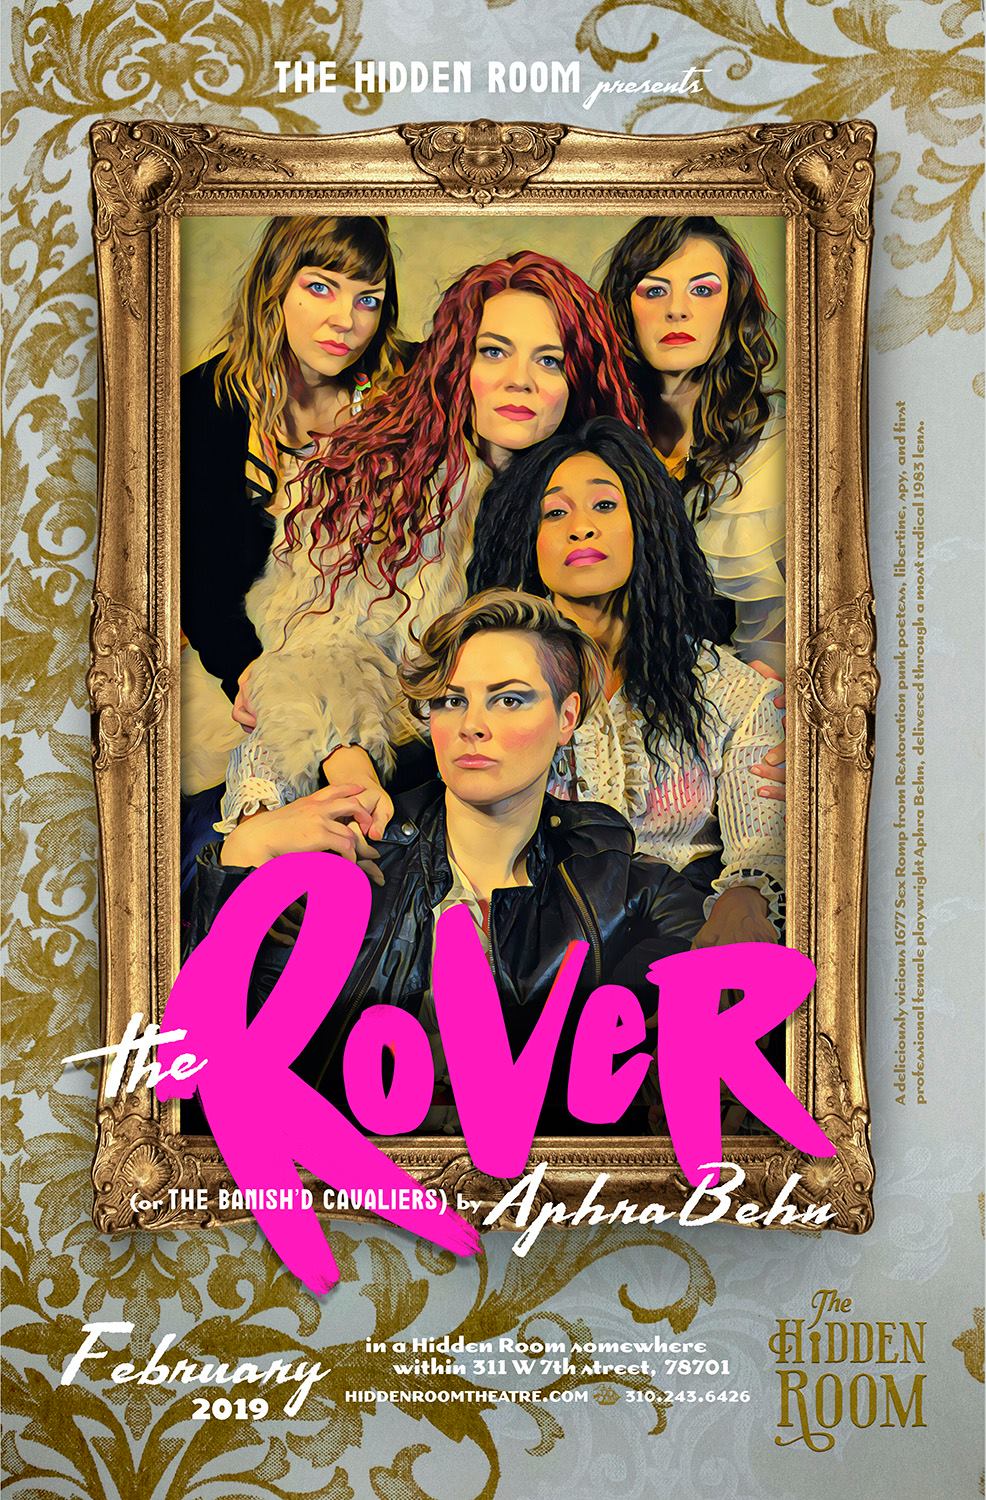 The Rover by Hidden Room Theatre